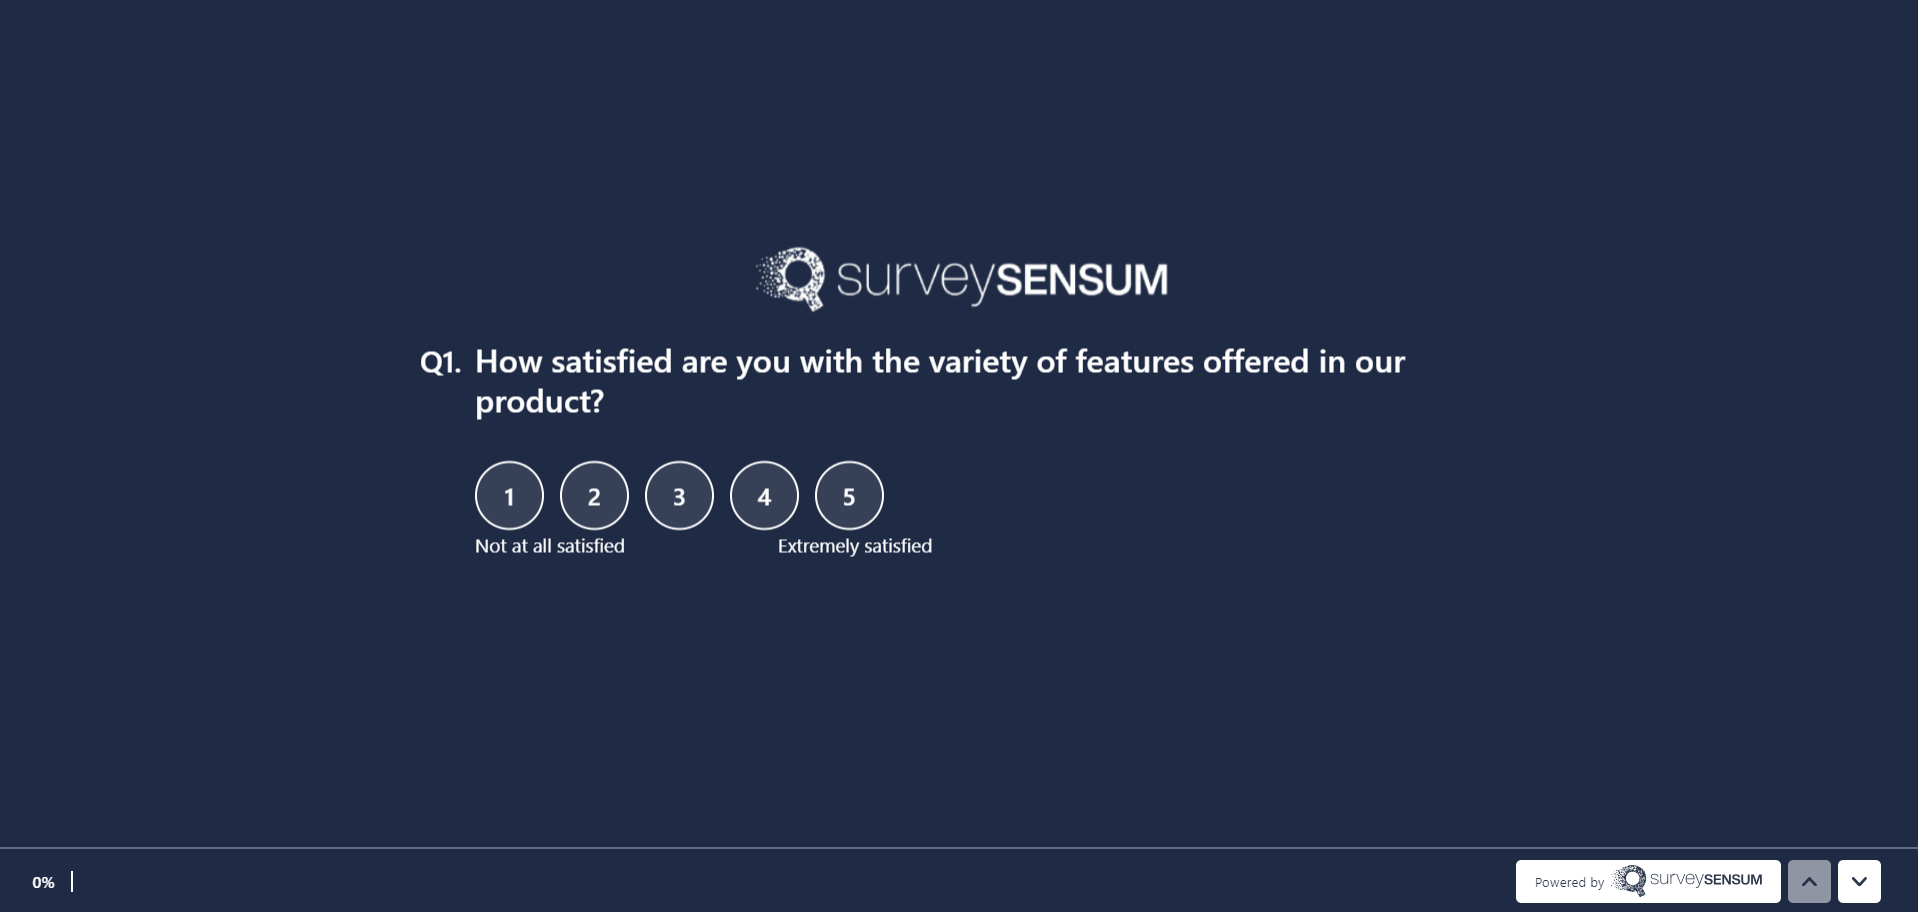 This is the image of the CSAT survey where users are being asked how satisfied they are with the variety of features offered in the product. This will help you reap the benefits of customer satisfaction surveys.